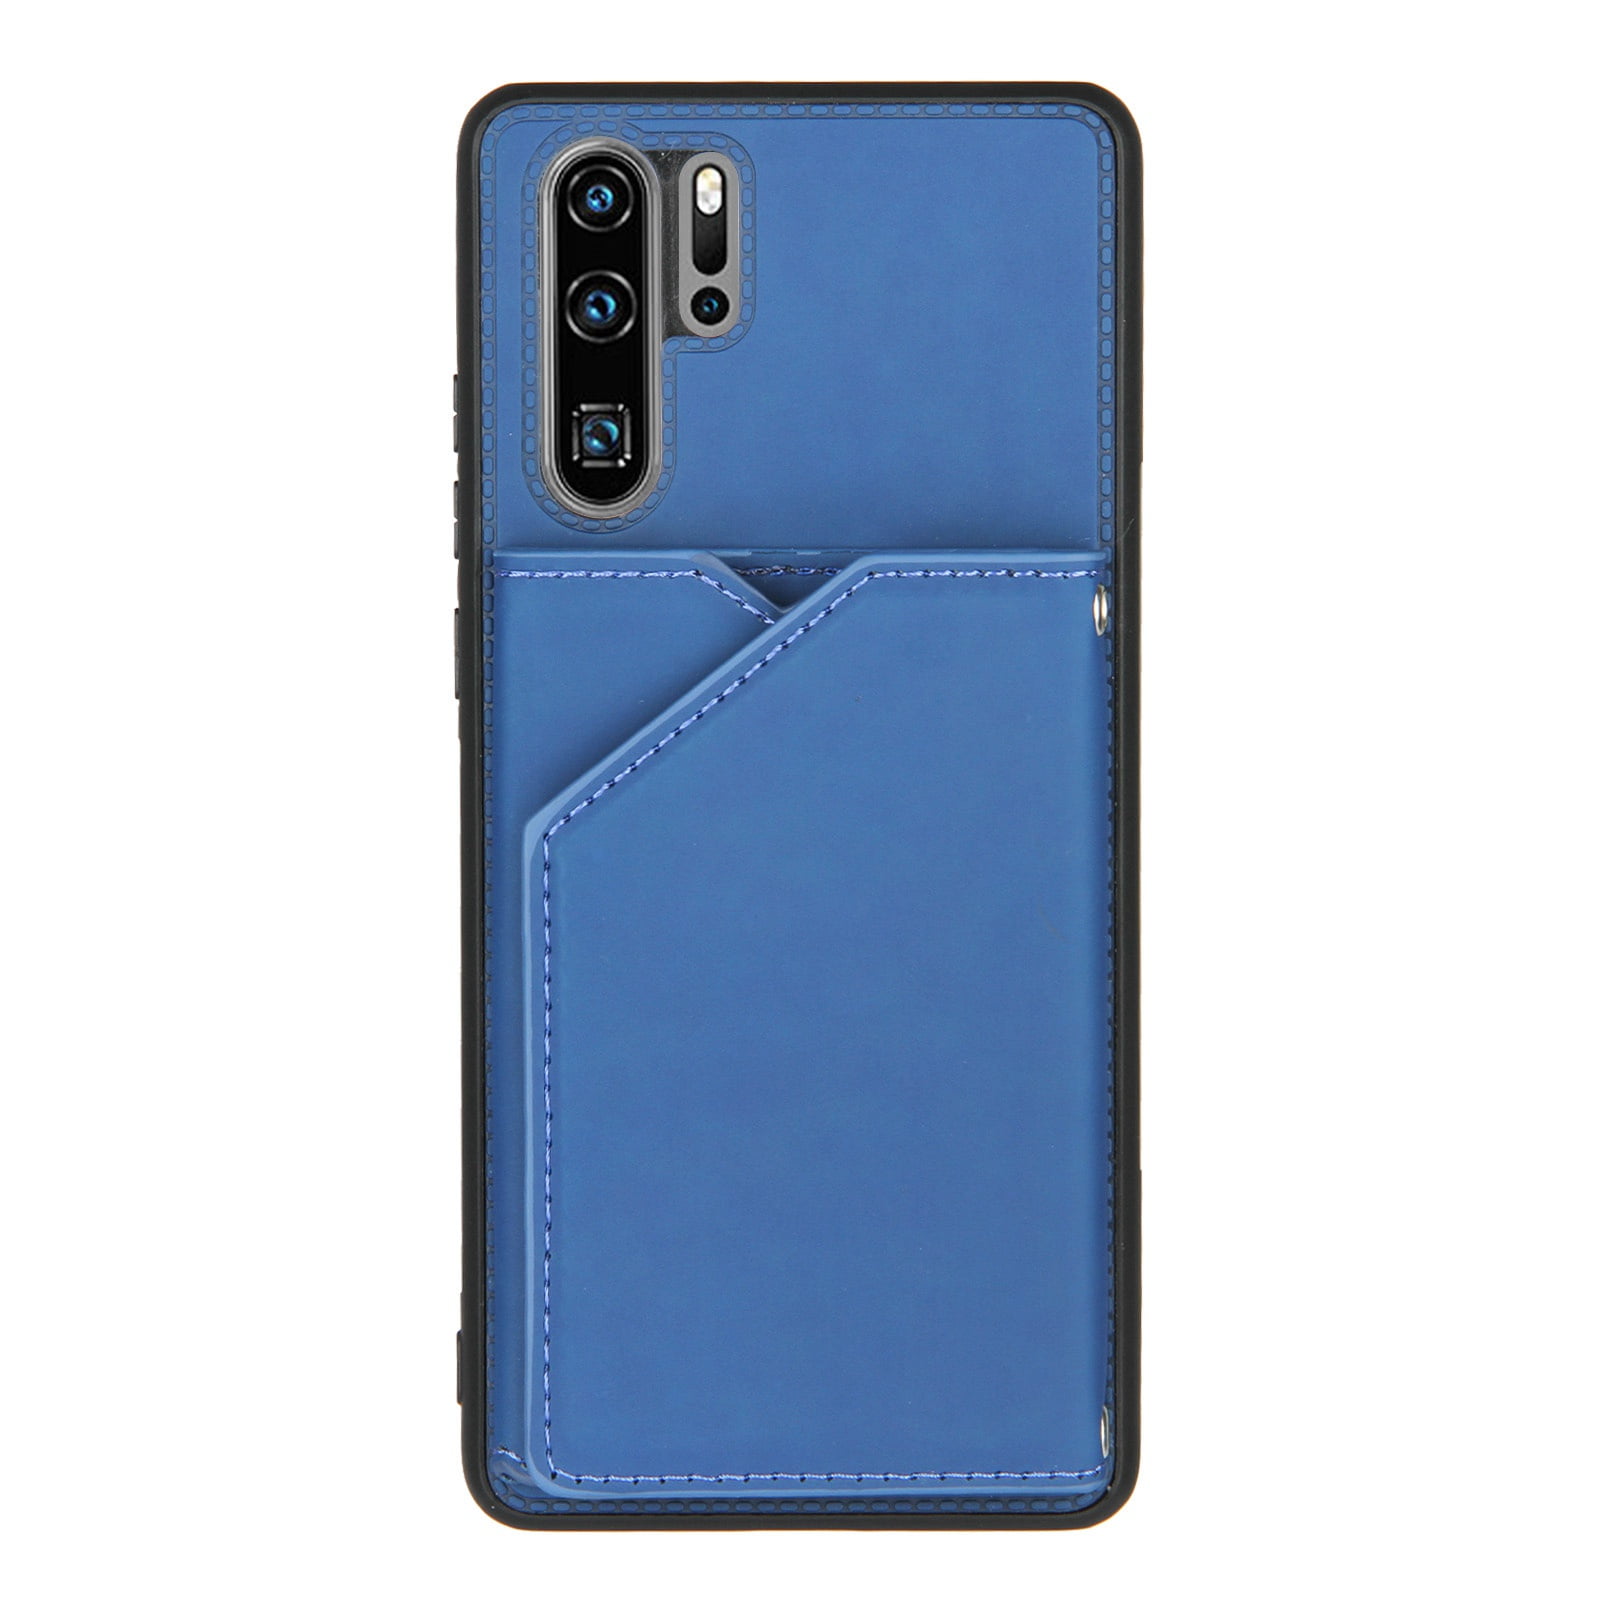 Huawei P30 lite Flip Case Cover for Leather Card Holders Kickstand Mobile Phone Cover Extra-Protective Business Flip Cover 